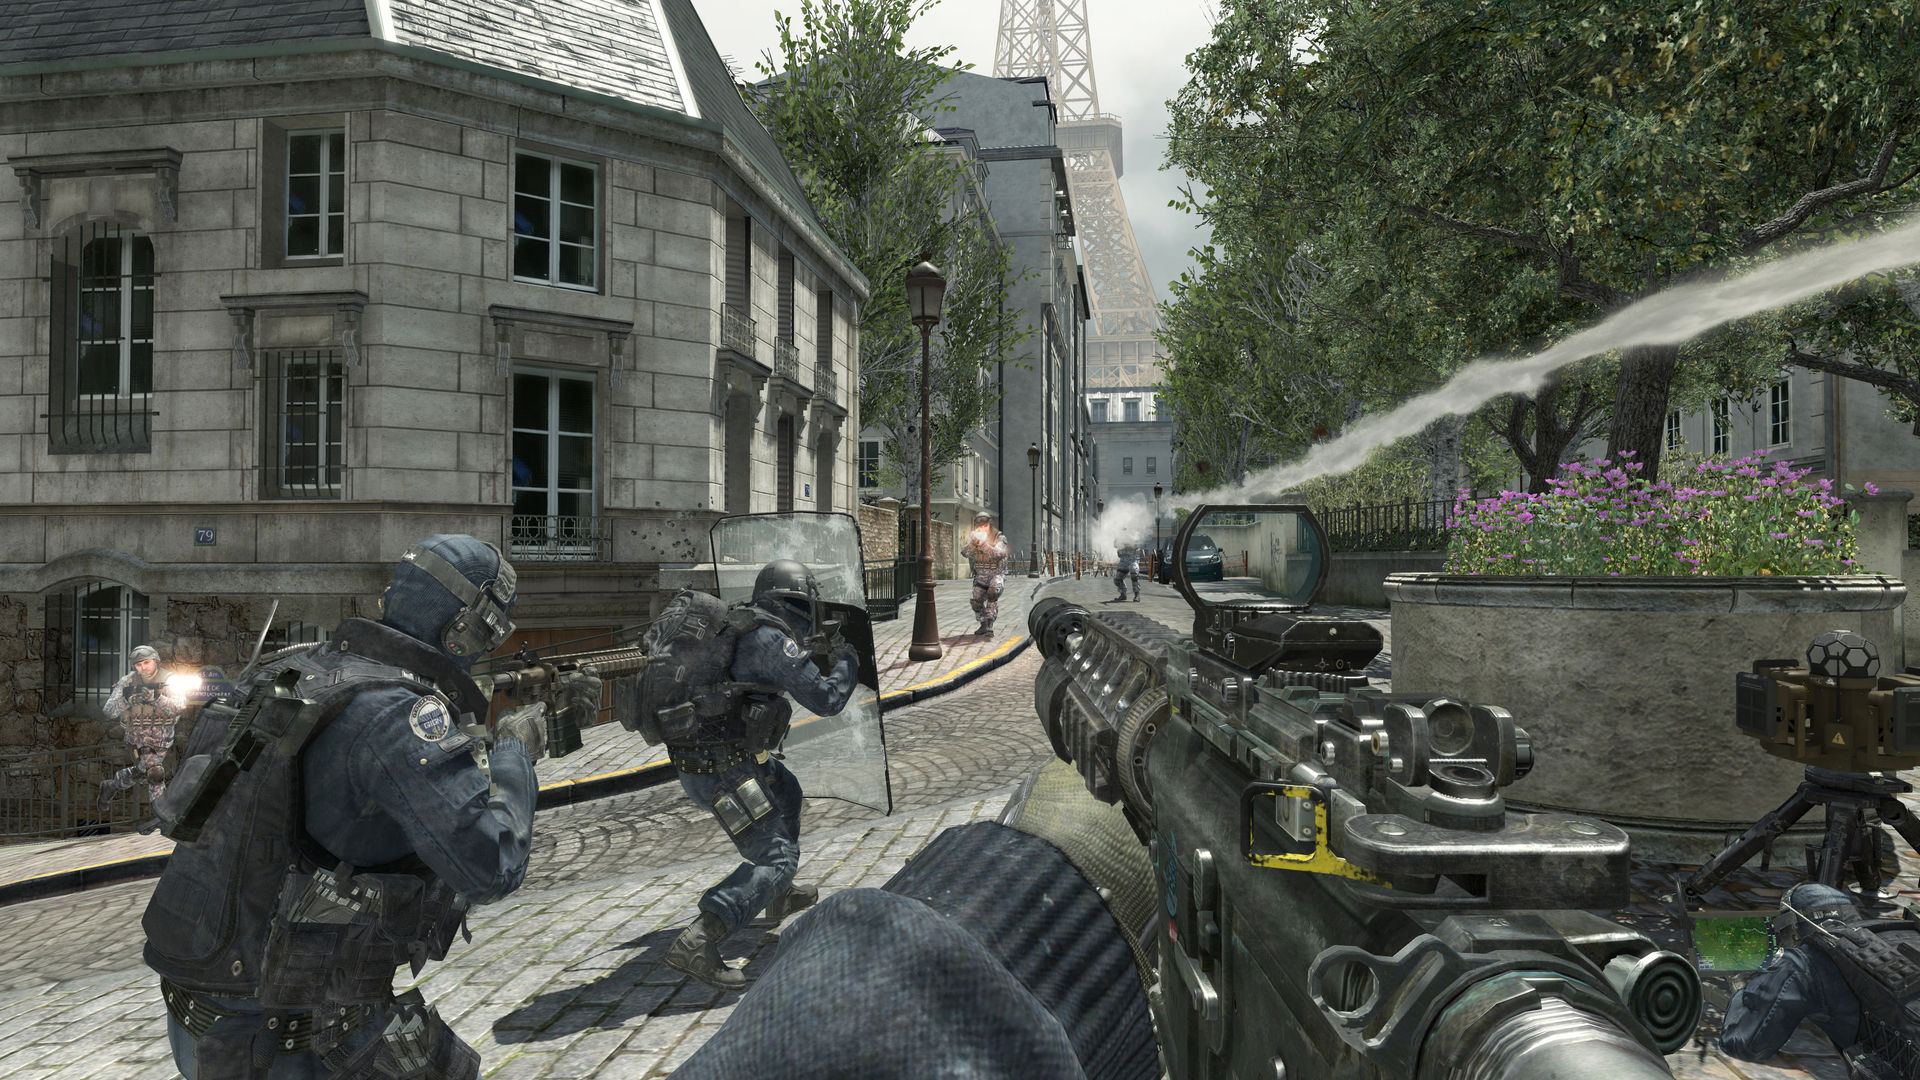 Call of Duty: Modern Warfare 3 PC Requirements Will Leave You Stunned -  FandomWire